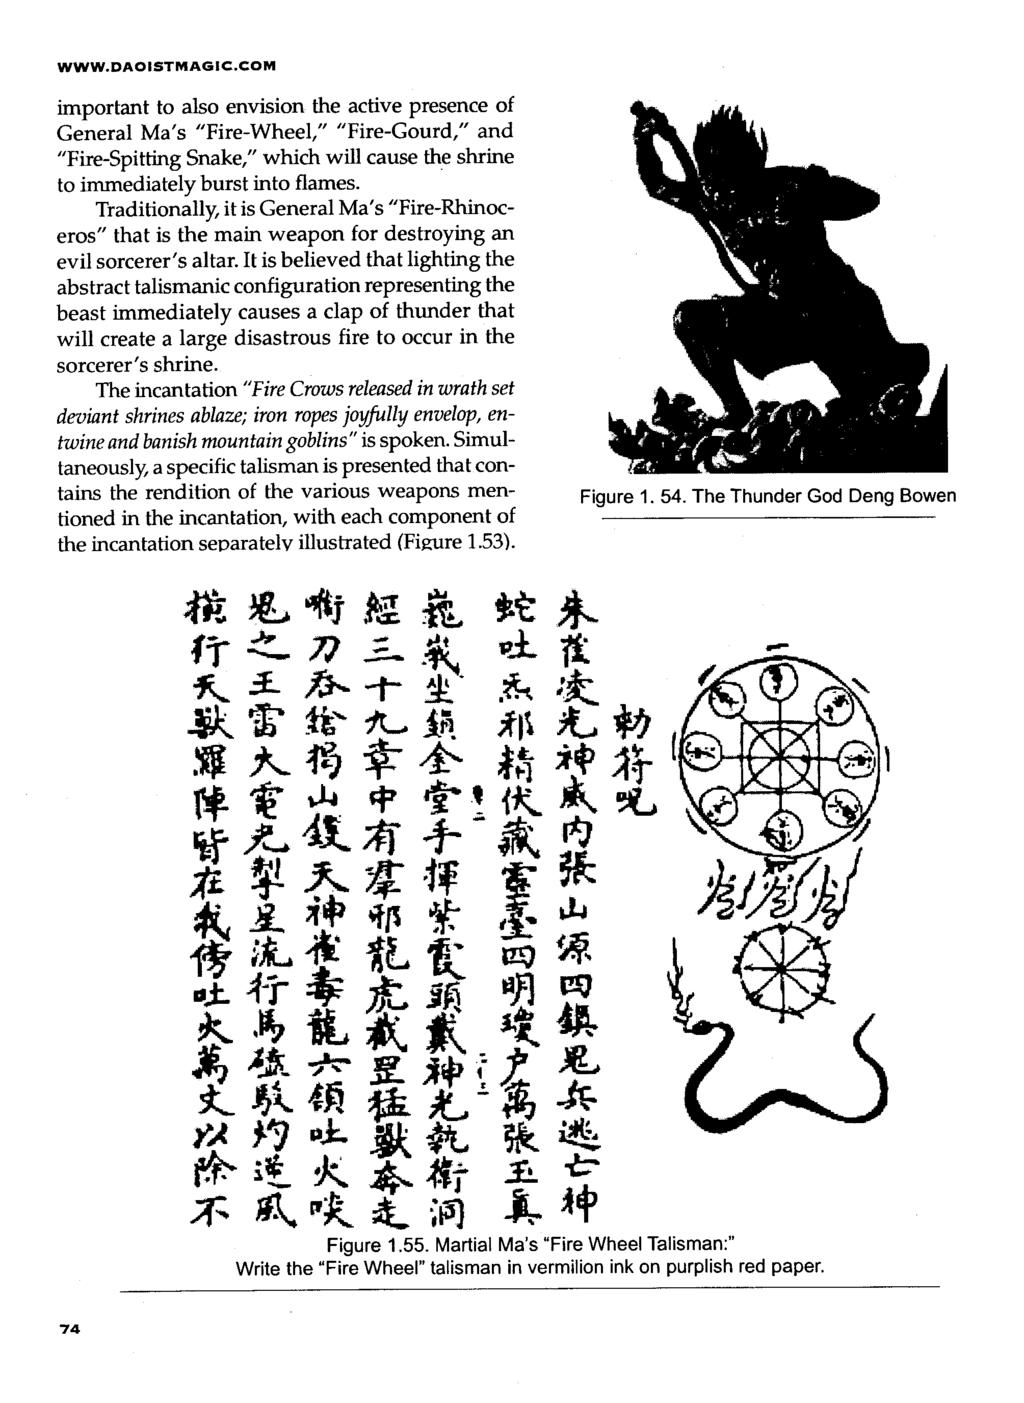 WWW.DAOISTMAGIC.COM important to also envision the active presence of General Ma's "Fire-Wheel," "Fire-Gourd," and "Fire-Spitting Snake," which will cause the shrine to immediately burst into flames.